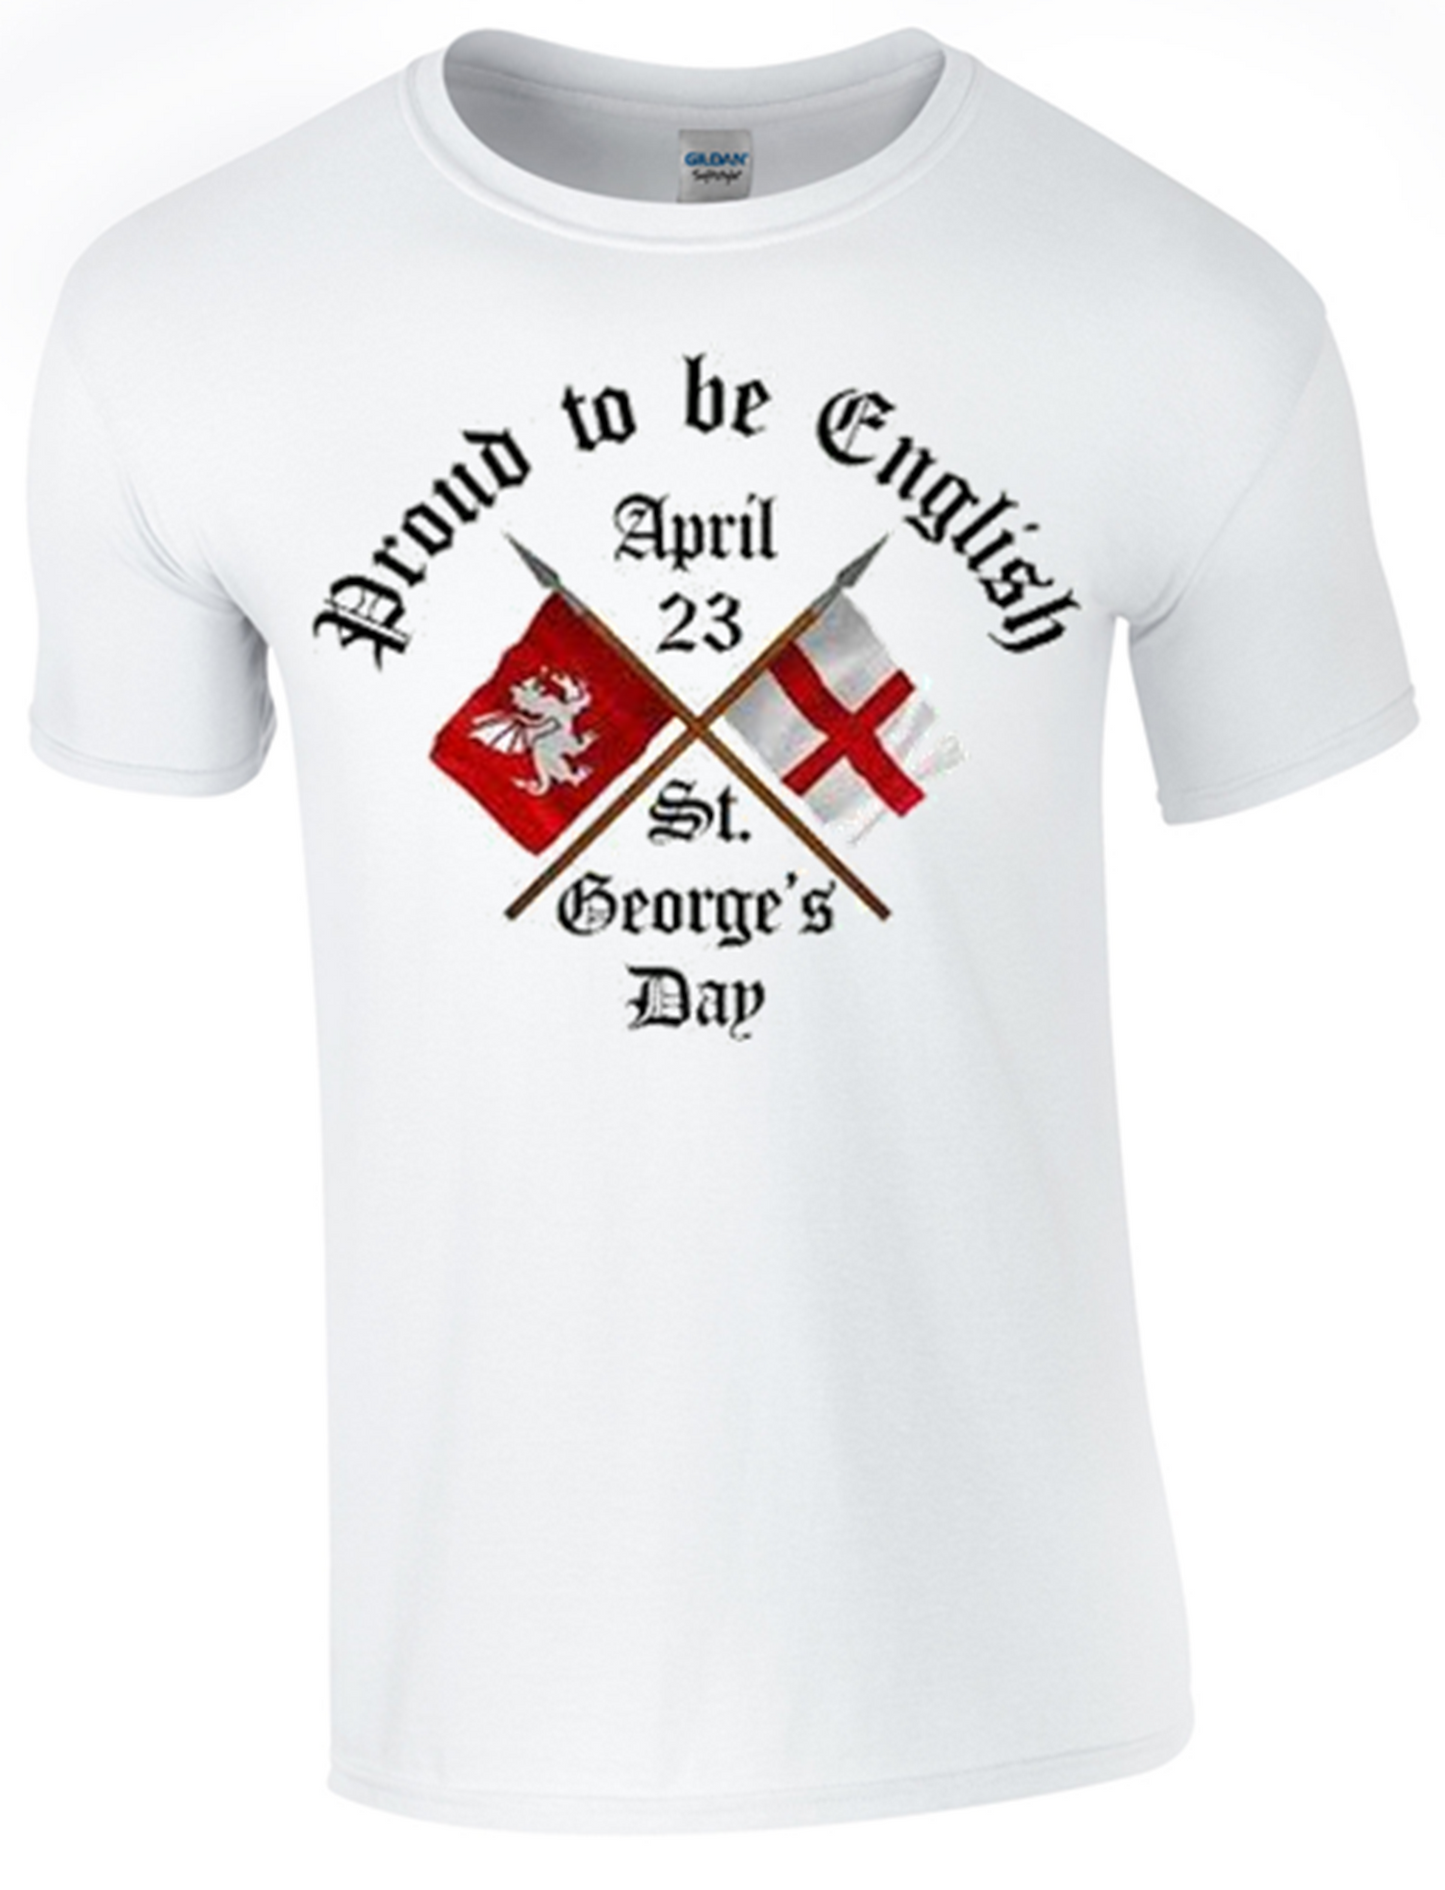 St George's Day Proud to be English T-Shirt Printed DTG (Direct to Garment) for a Permanent Finish. - Army 1157 kit S Army 1157 Kit Veterans Owned Business